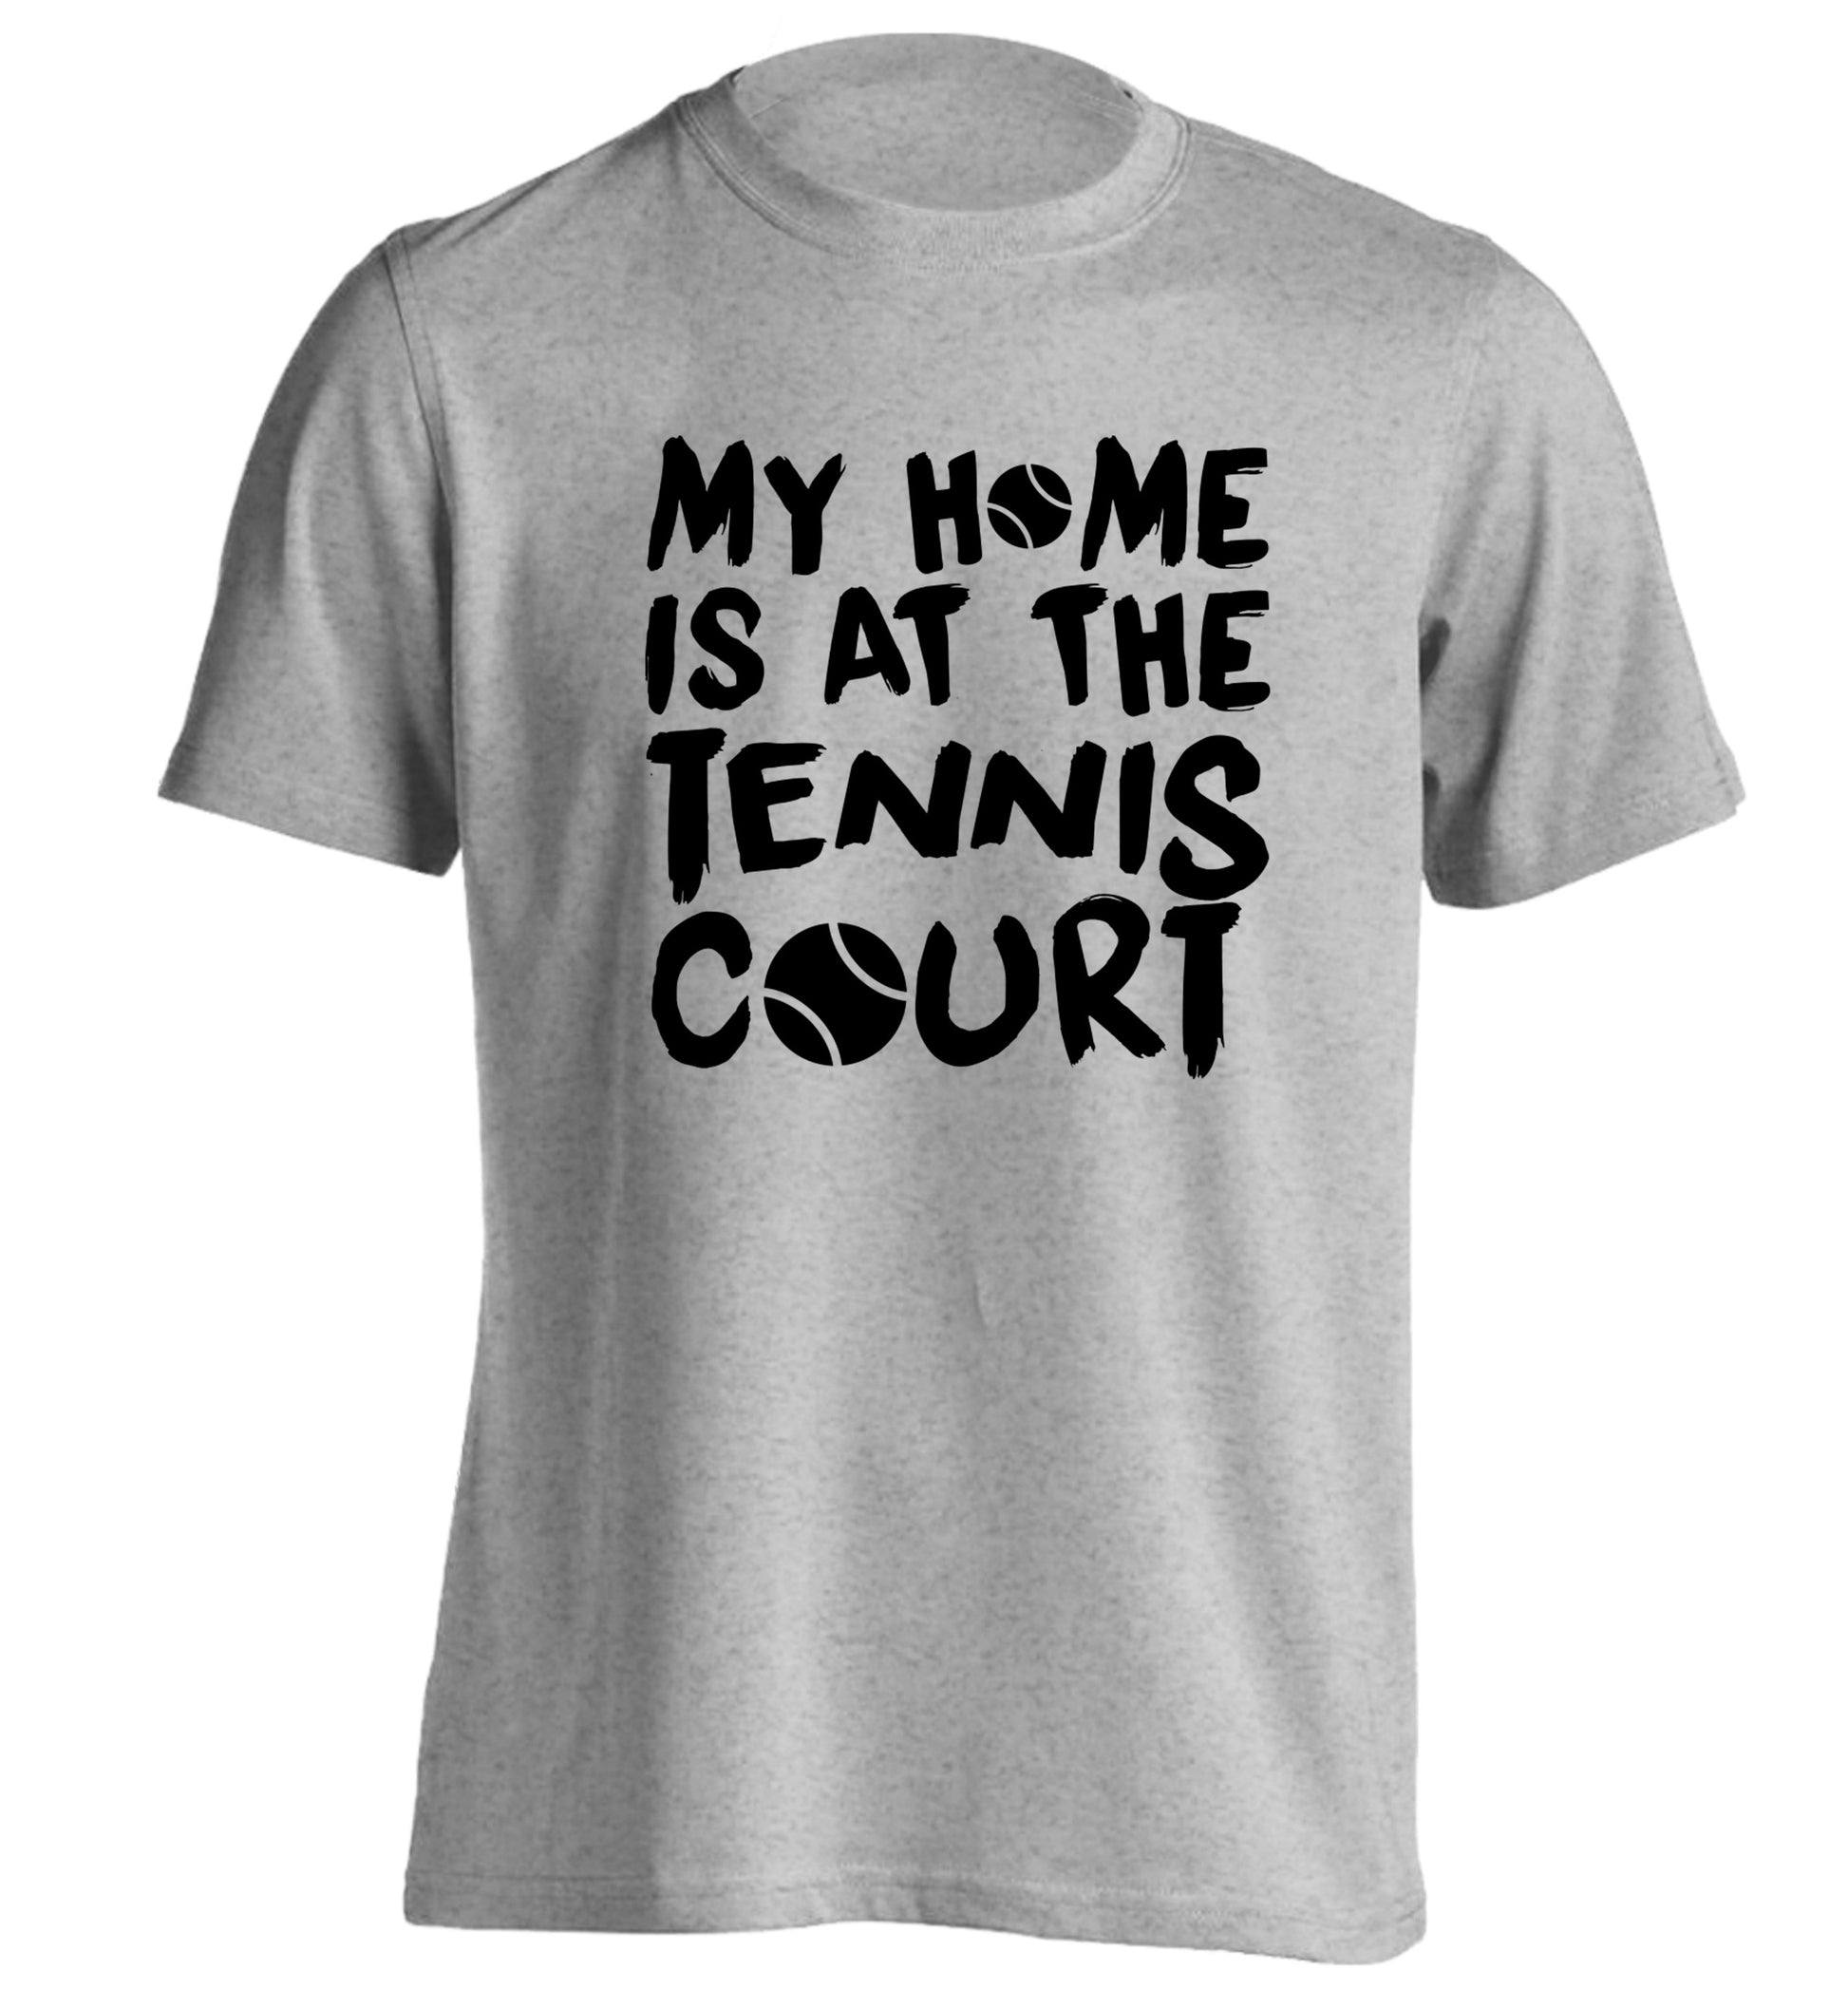 My home is at the tennis court adults unisex grey Tshirt 2XL